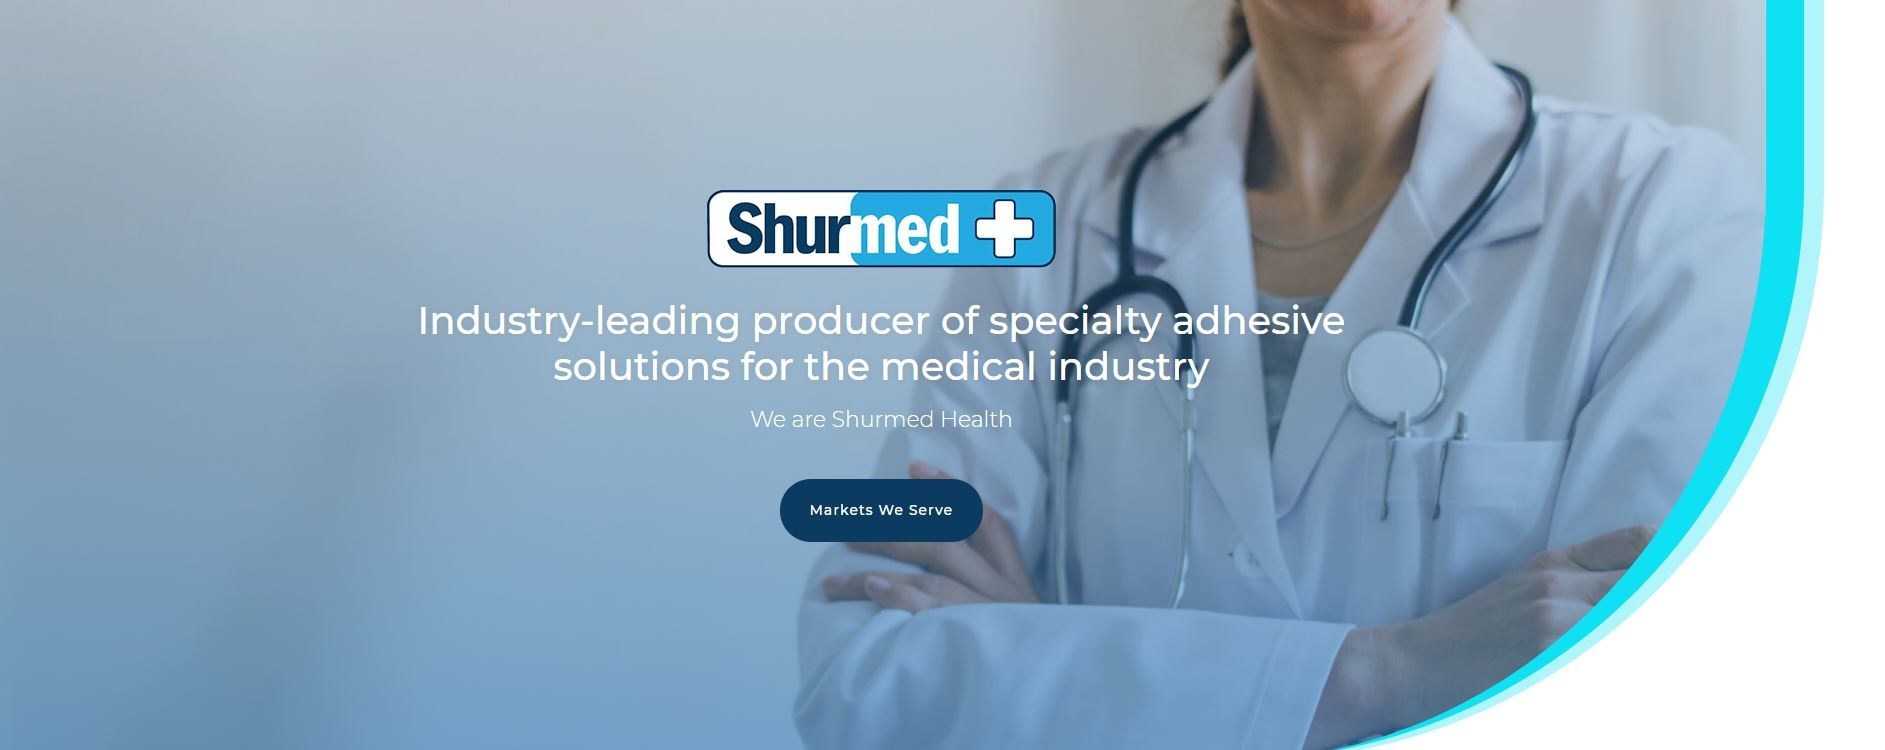 Manufacturer of Specialty Adhesive Solutions for Home and Professional Medical Use Launches New Website